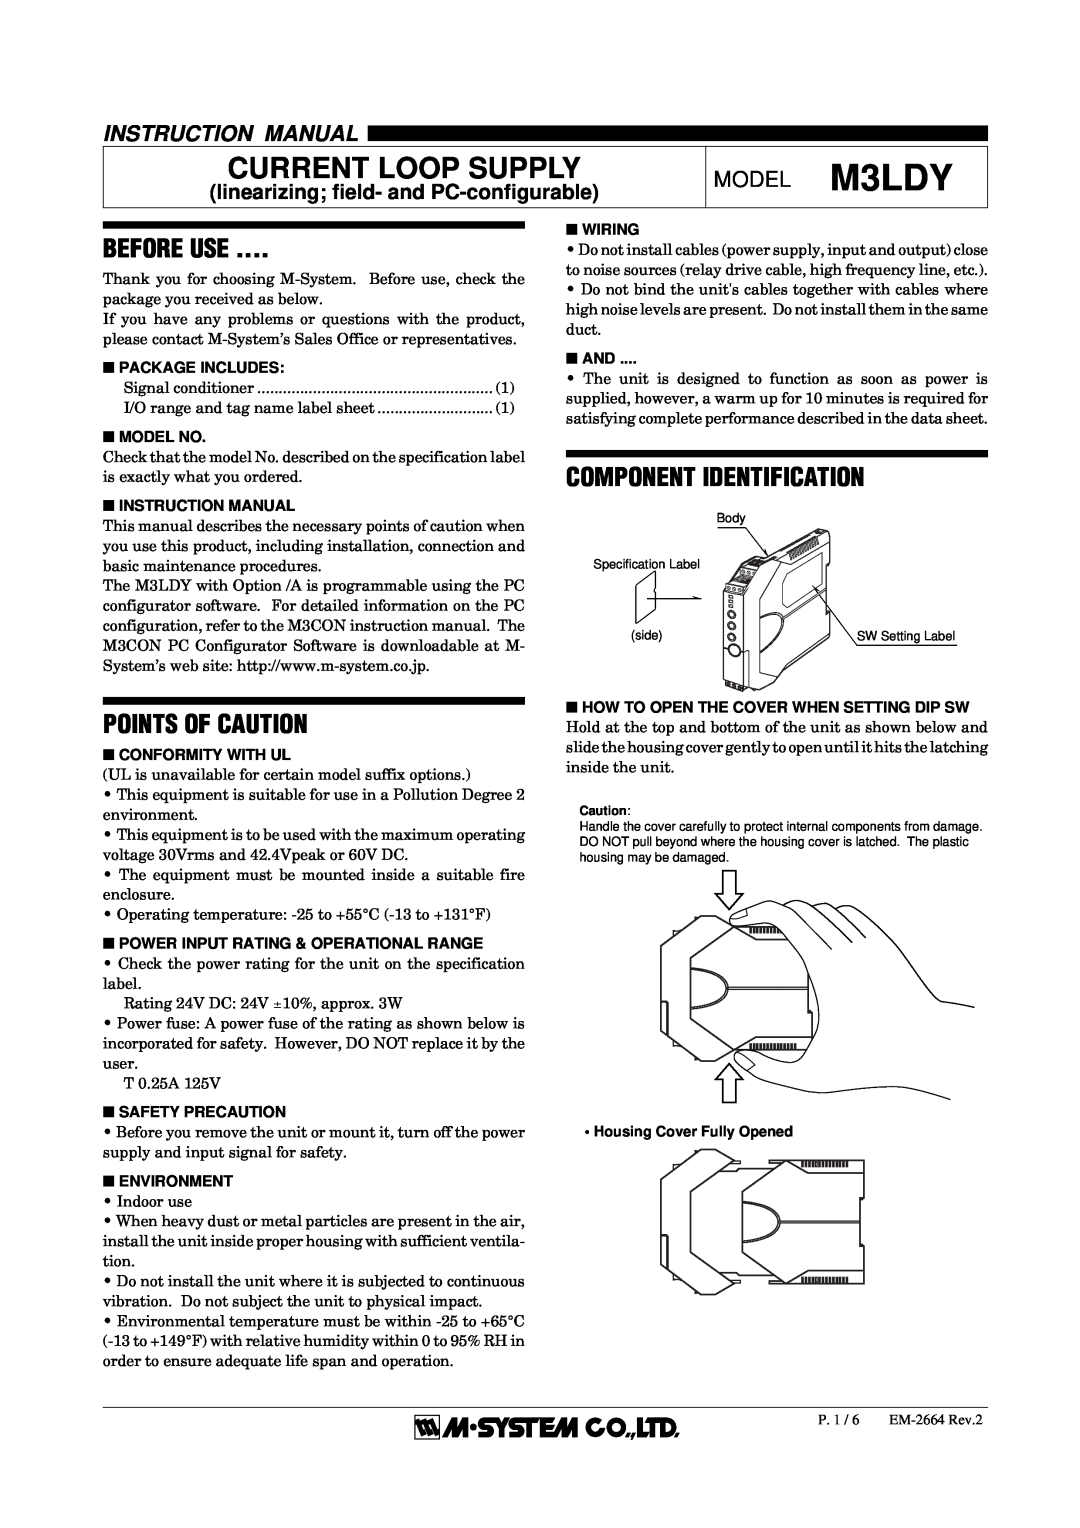 B&B Electronics M3LDY instruction manual Before Use, Component Identification, Points Of Caution, Current Loop Supply 